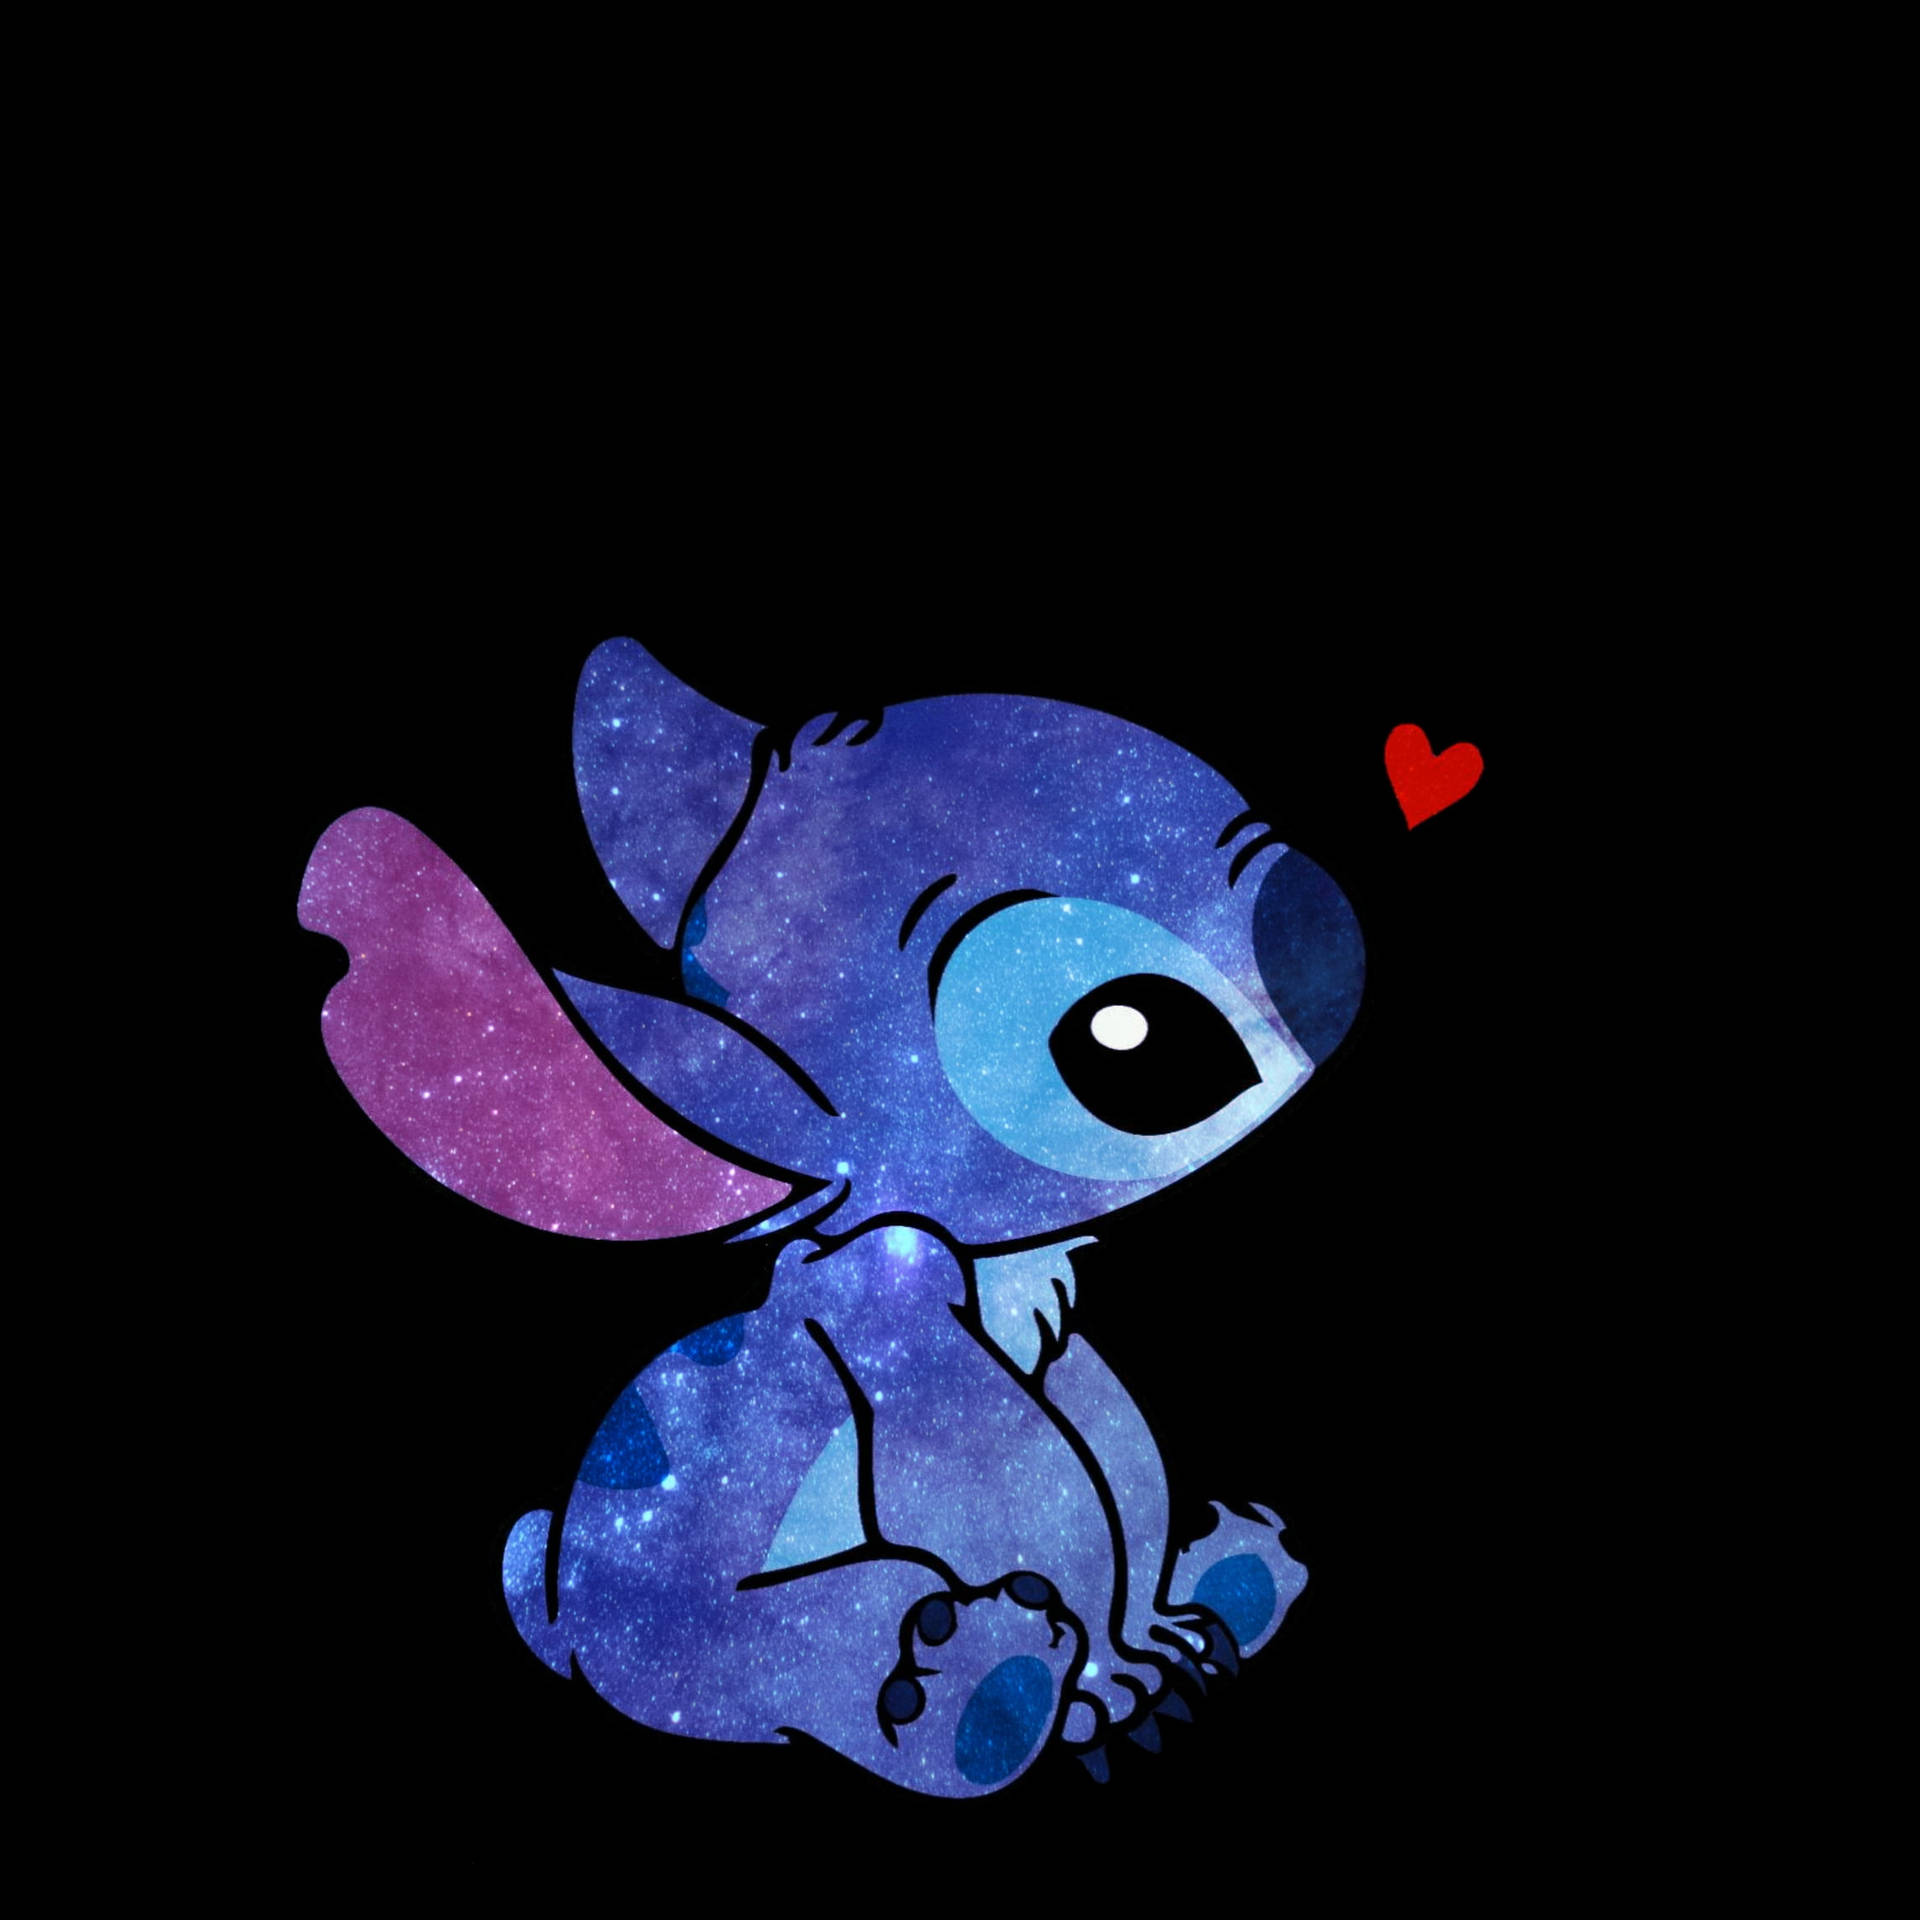 Download Galaxy Aesthetic Stitch Backgrounds Background  Stitch disney  Stitch Galaxy